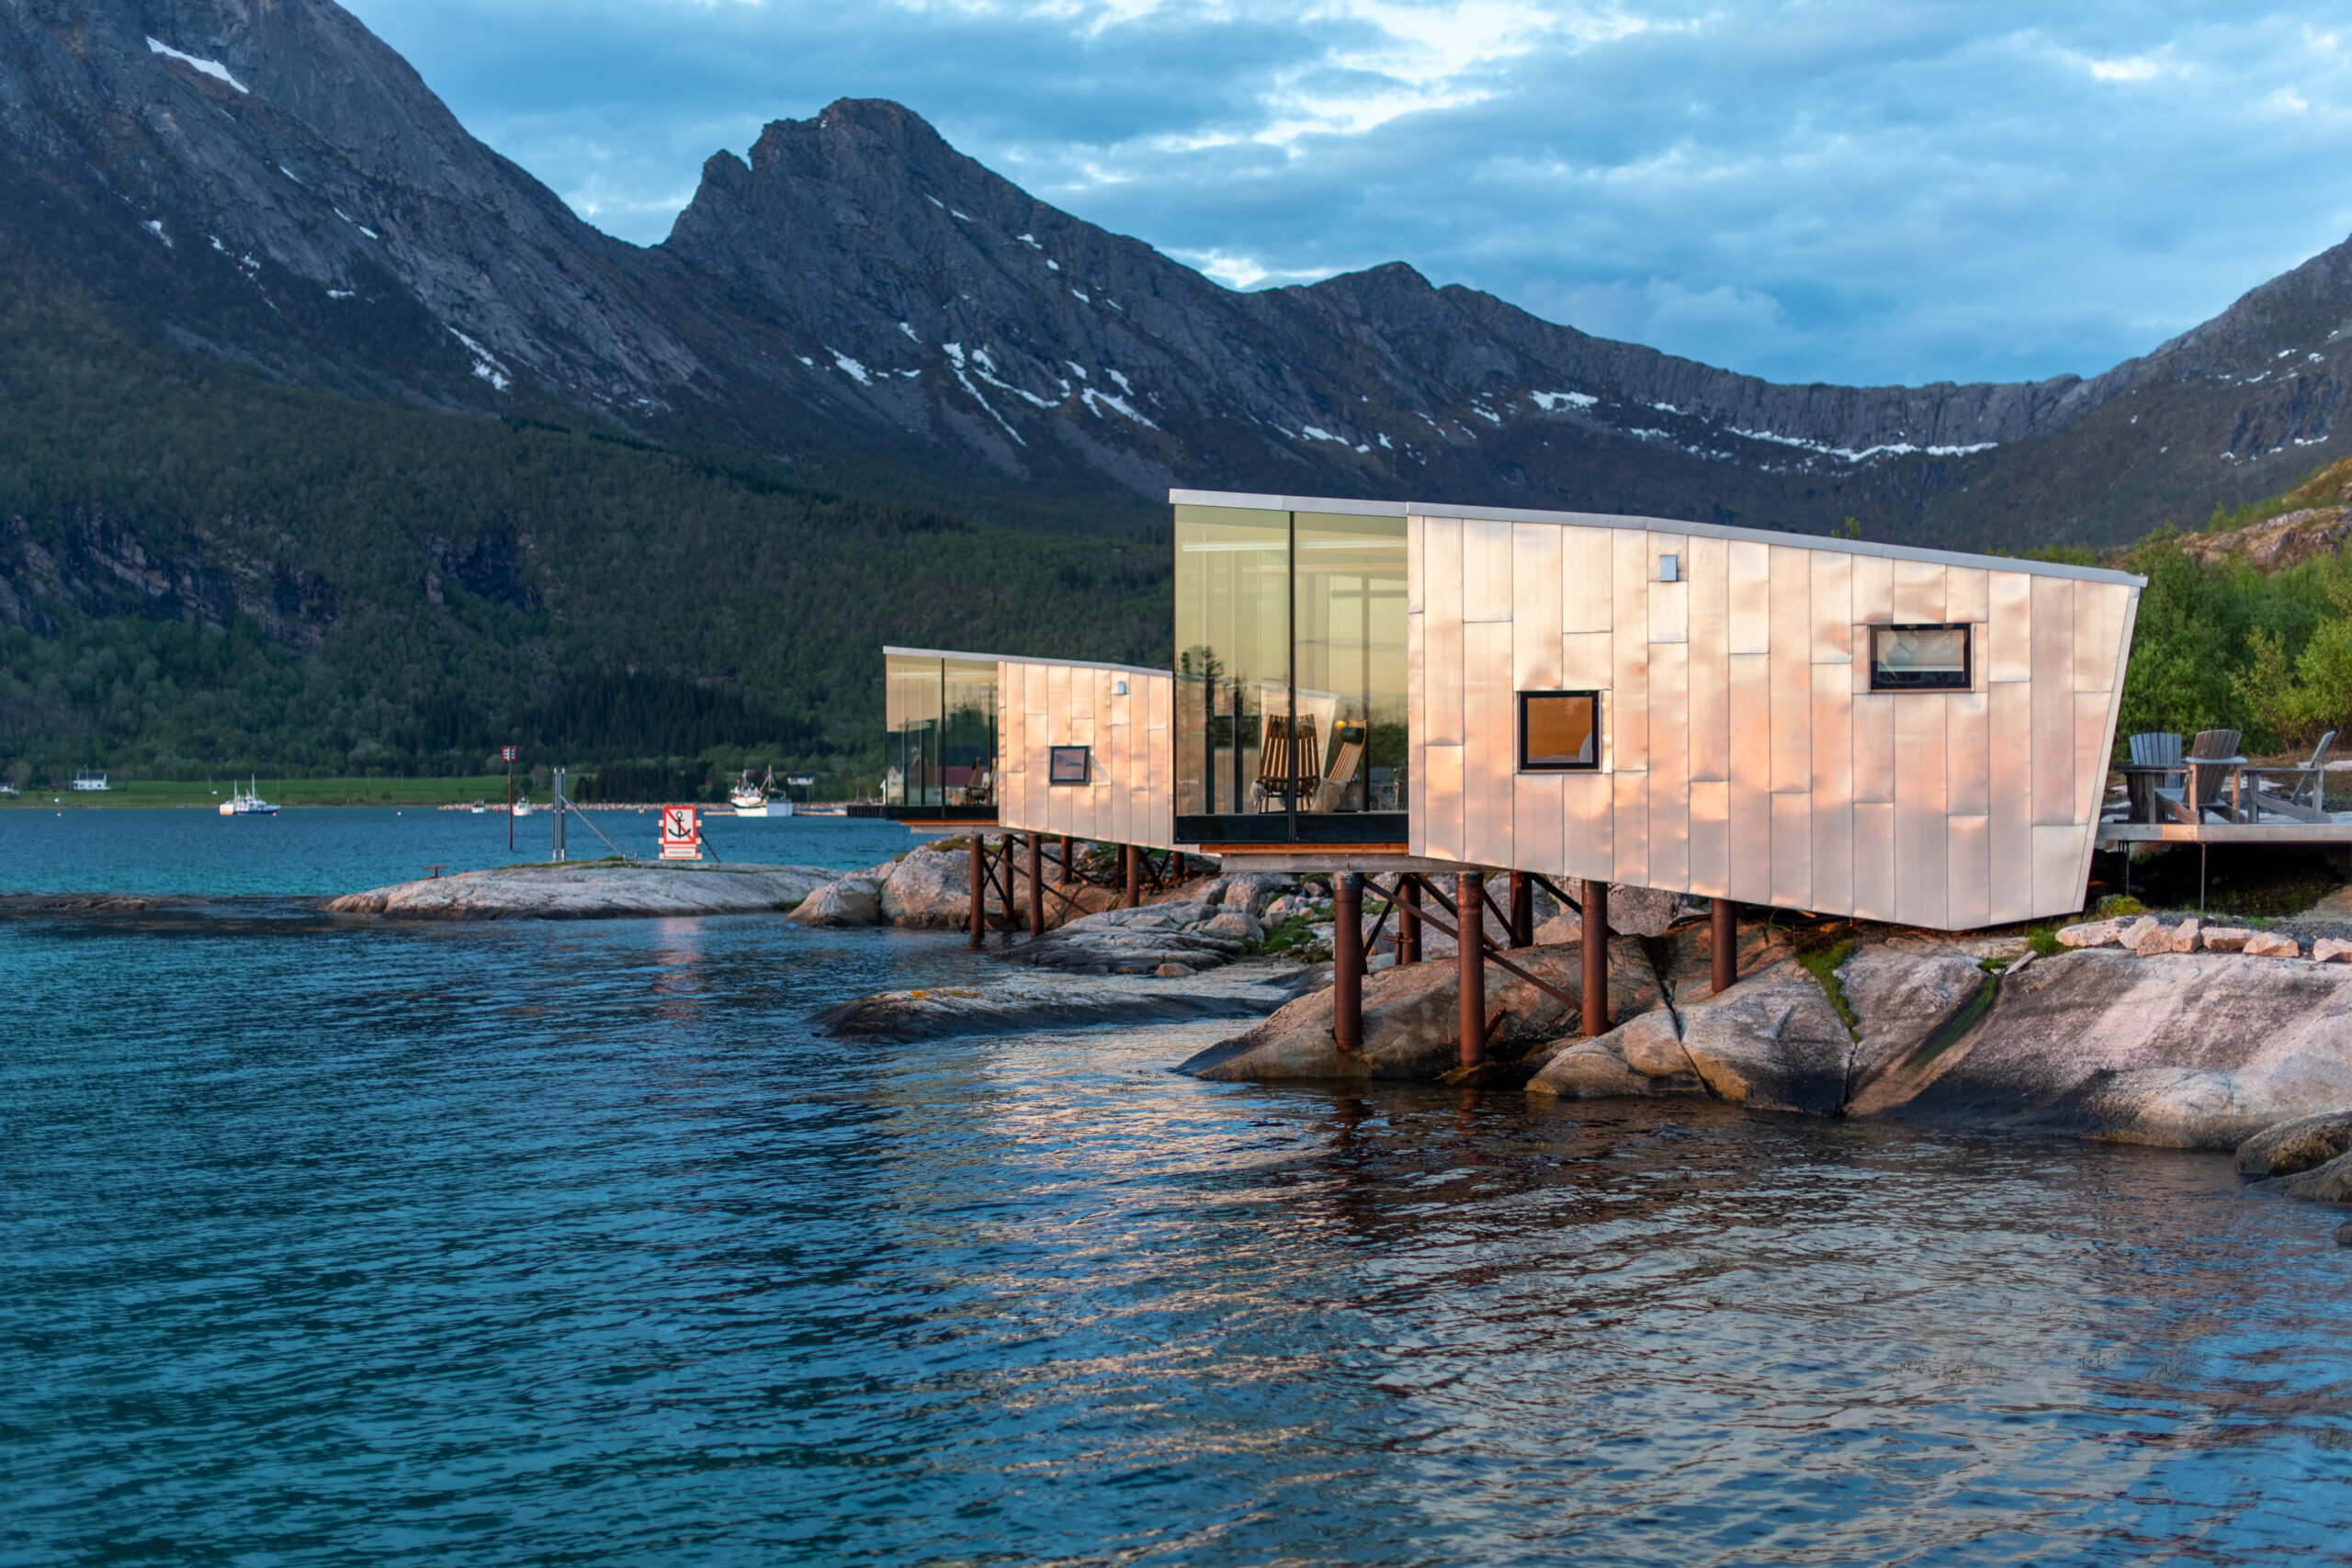 Manshausen Island Sea Cabins by Snorre Stinessen Architecture, Steve King Architectural Imaging